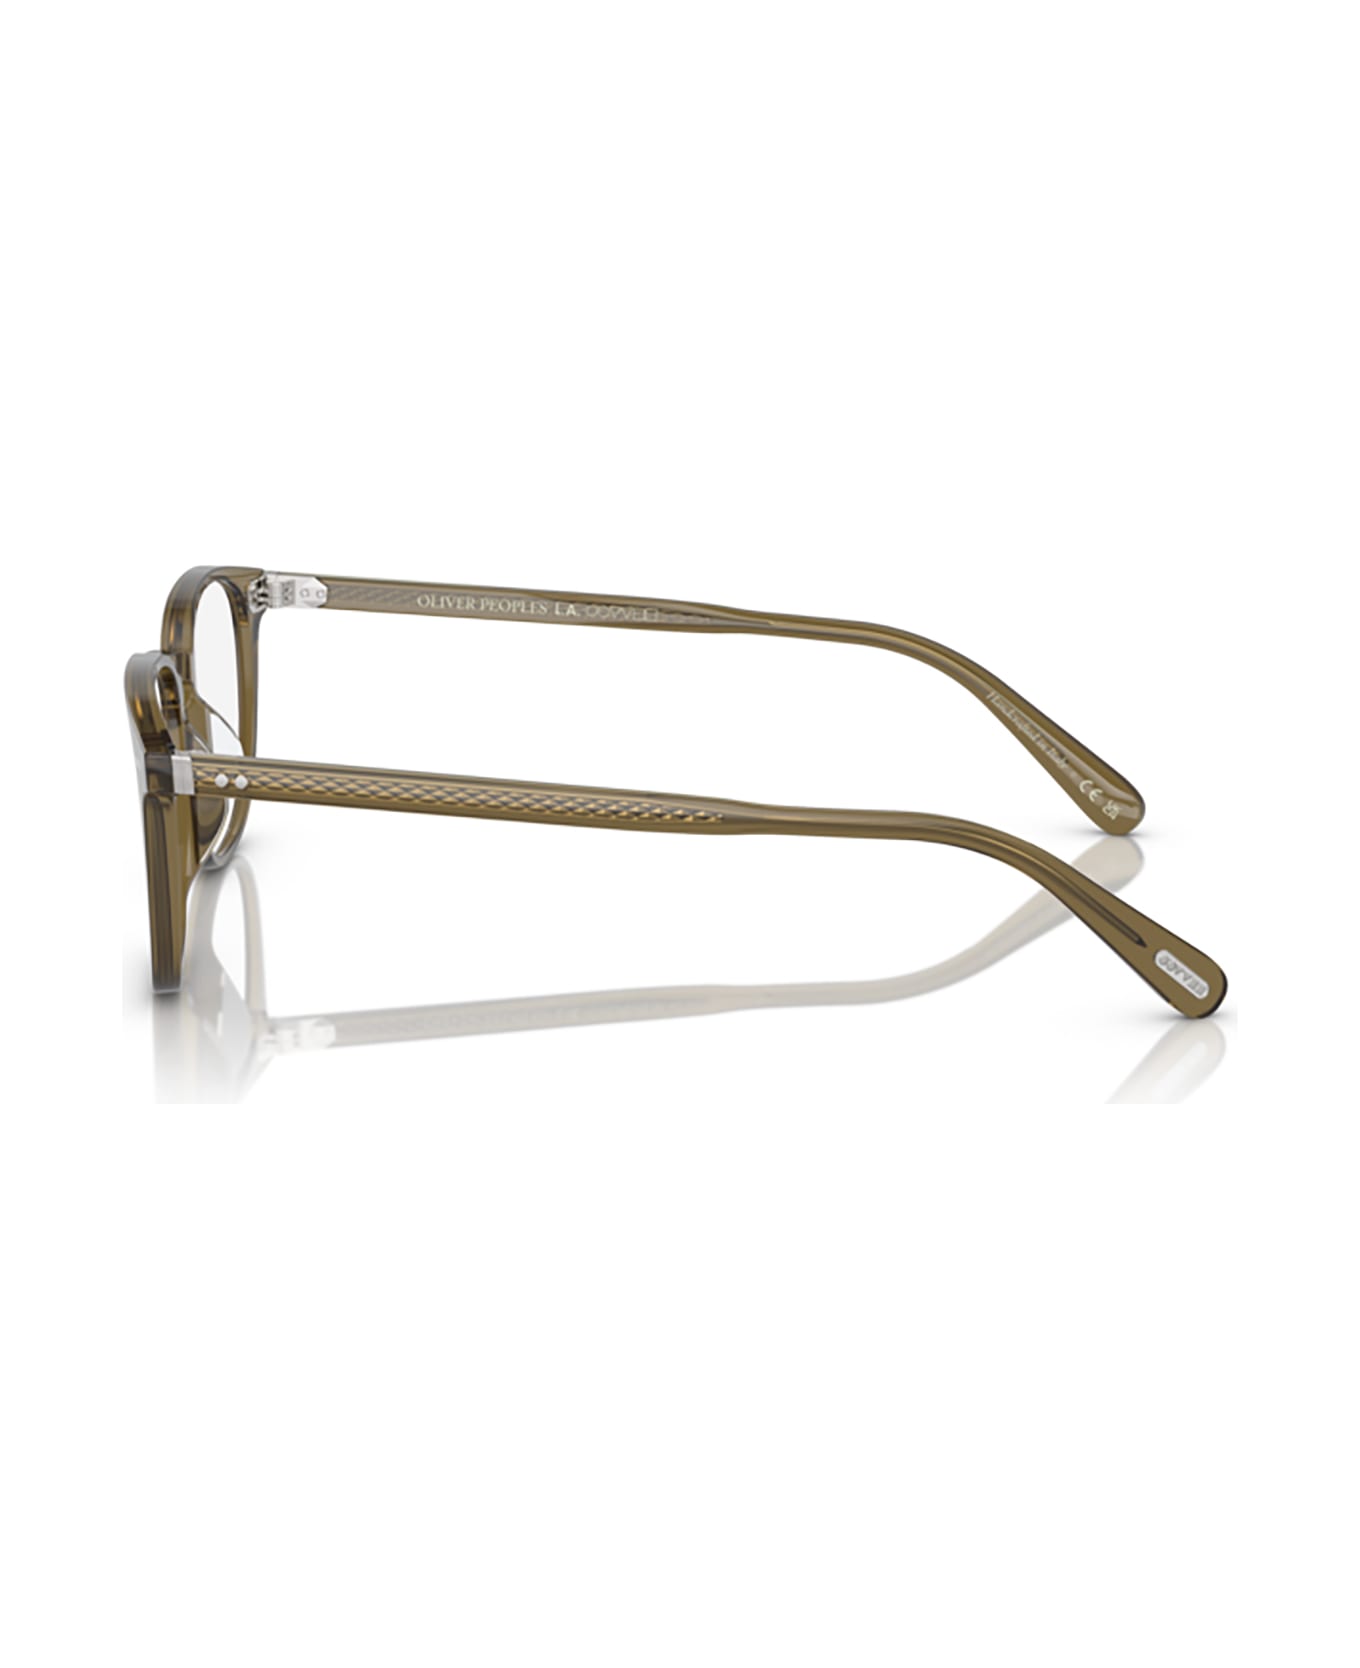 Oliver Peoples Ov5532u Dusty Olive Glasses - Dusty Olive